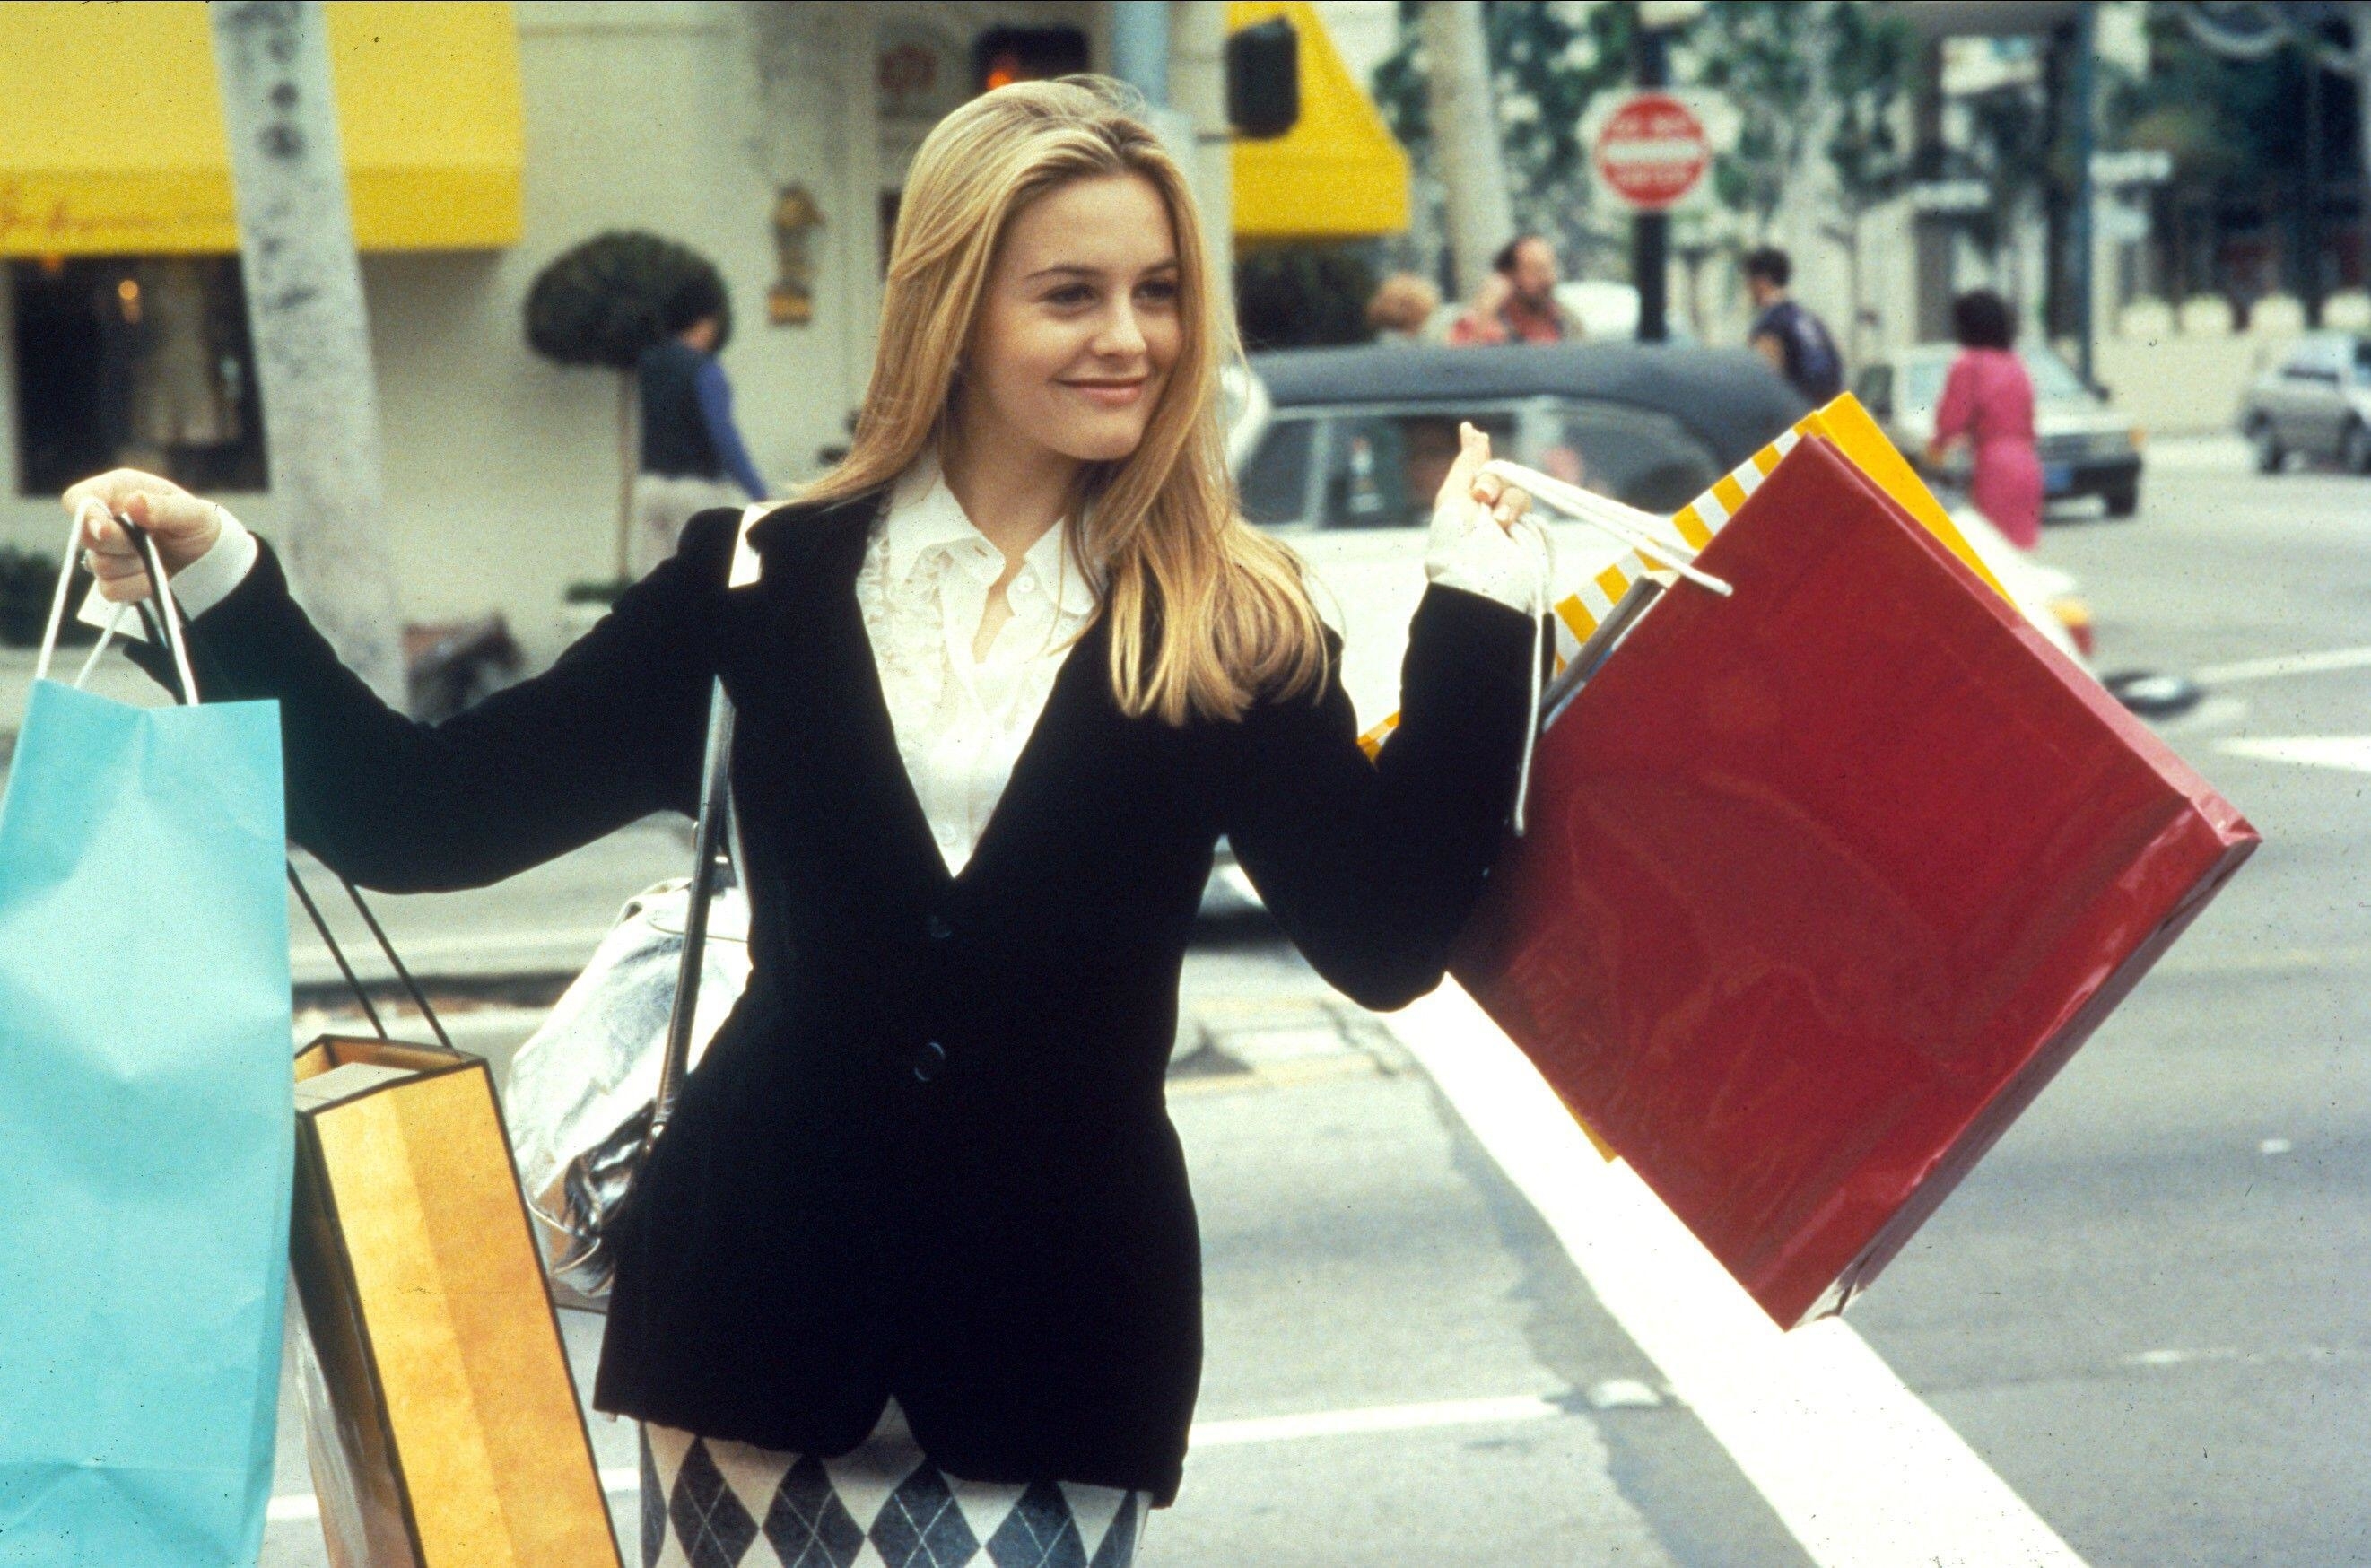 Cher walking around with shopping bags in Clueless